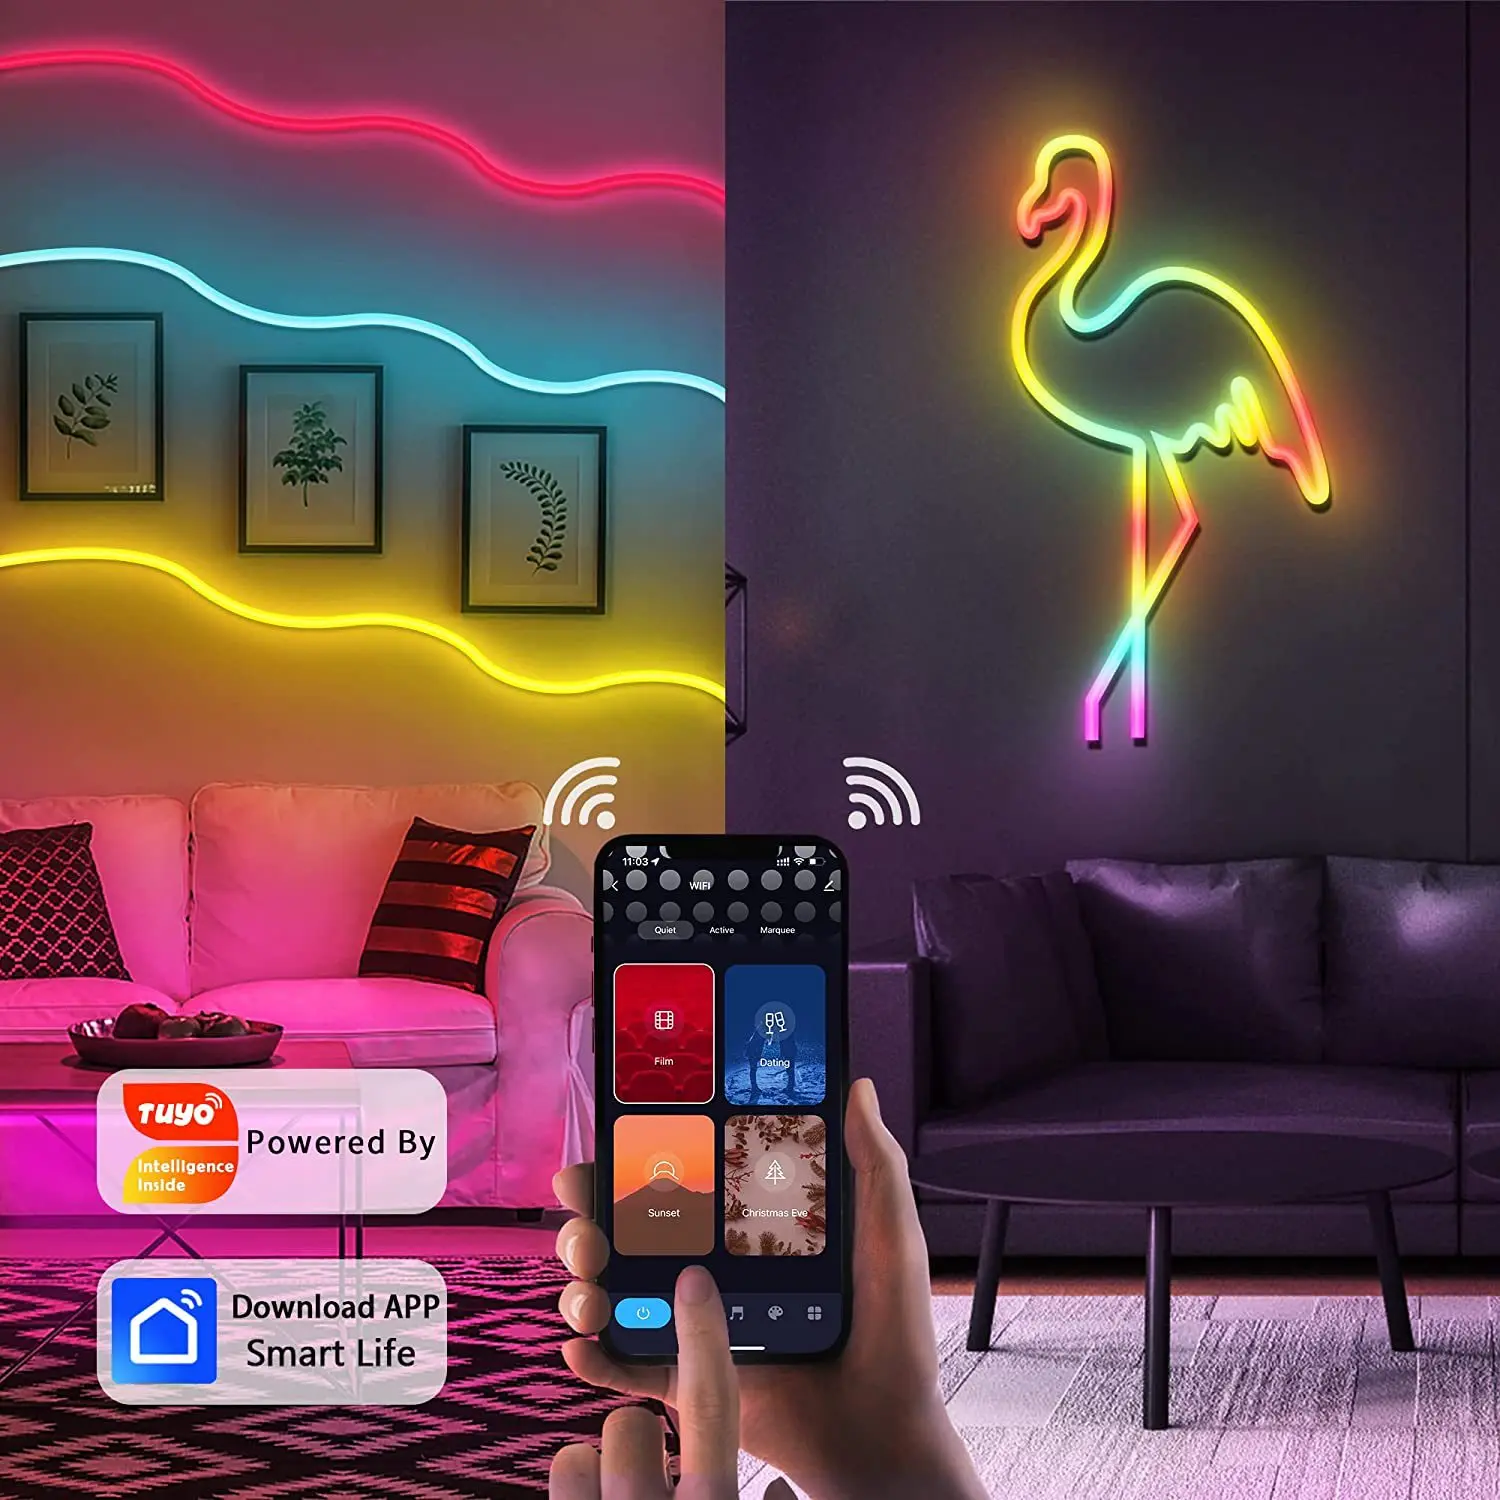 Govee Neon RGBIC Rope Lights with Music Sync, DIY Design, Works with Alexa,  Google Assistant, 10ft LED Strip Lights for Gaming, Bedroom Living Room